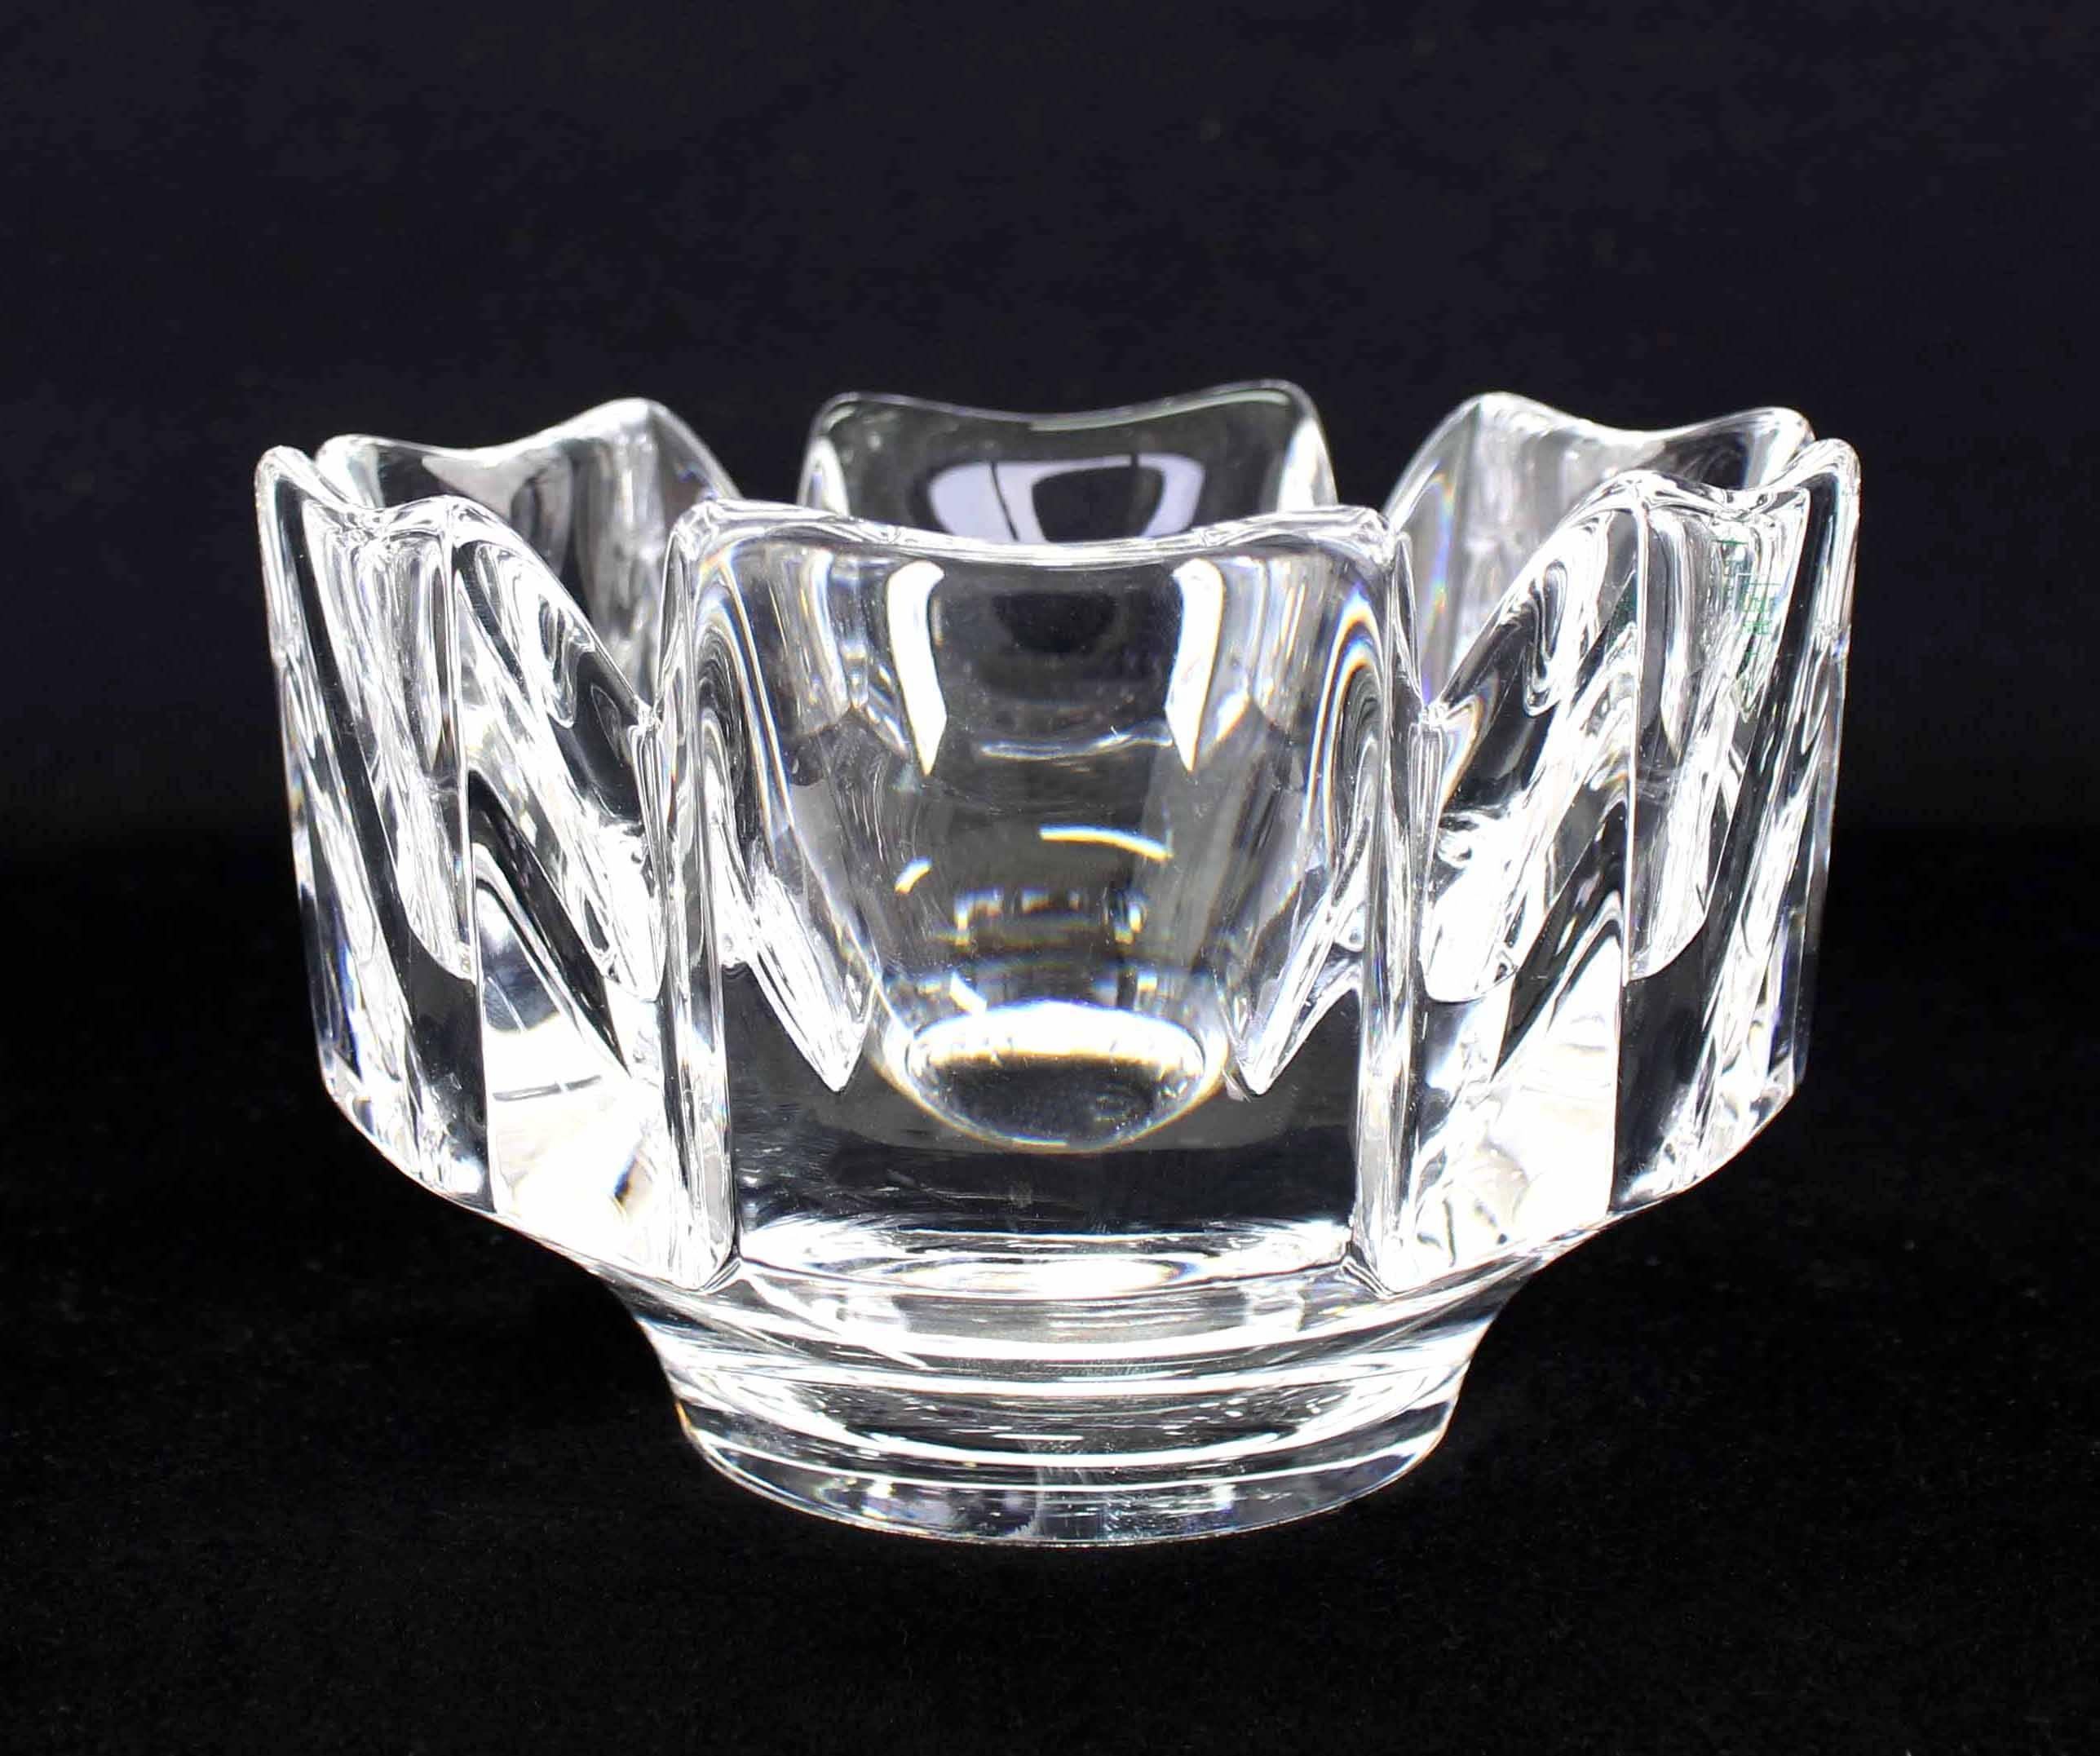 Pair of Heavy Crystal Bowl Vases by Orrefors In Excellent Condition For Sale In Rockaway, NJ